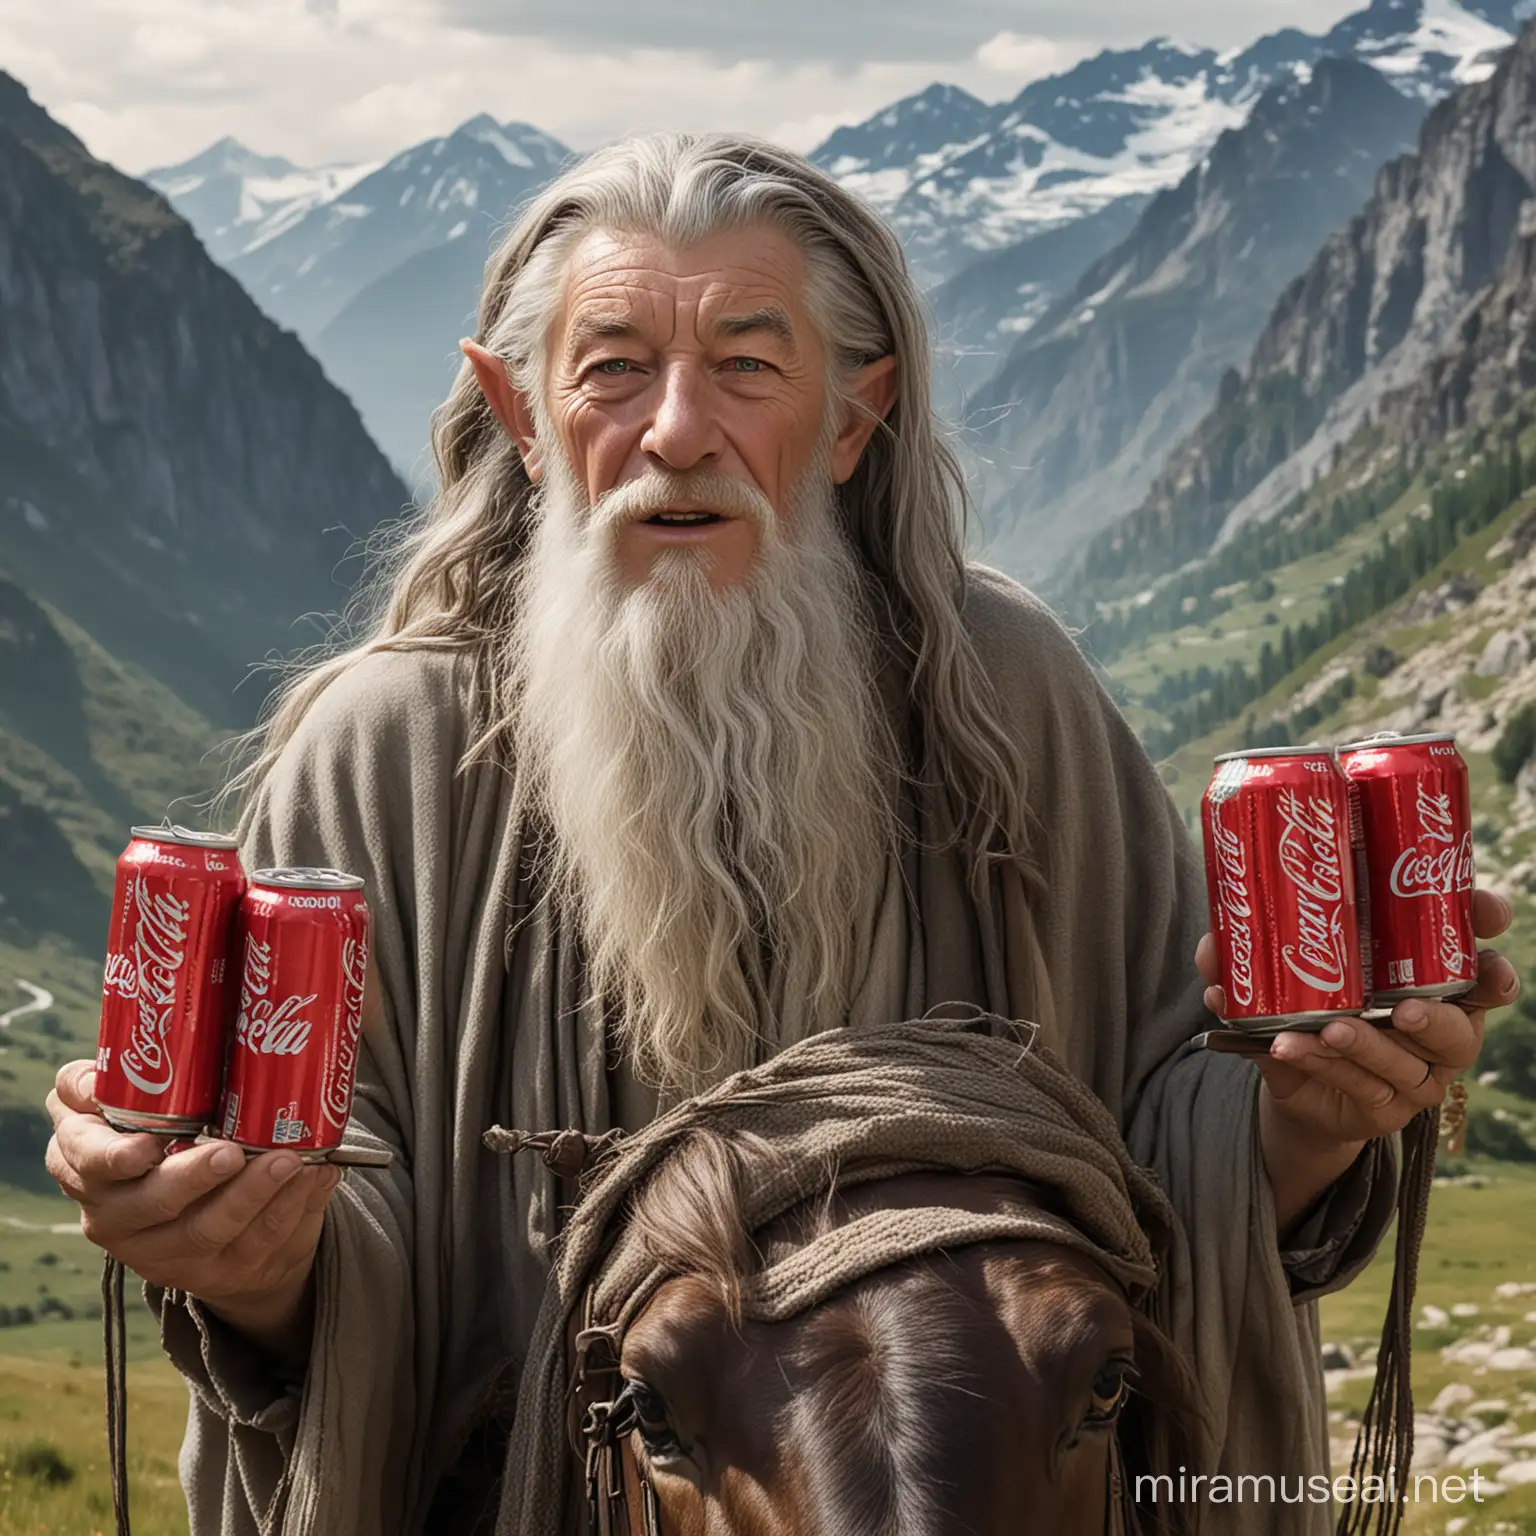 Gandalf rides a chariot with zero Coca cola cans with a wild expression on his face in a mountain landscape